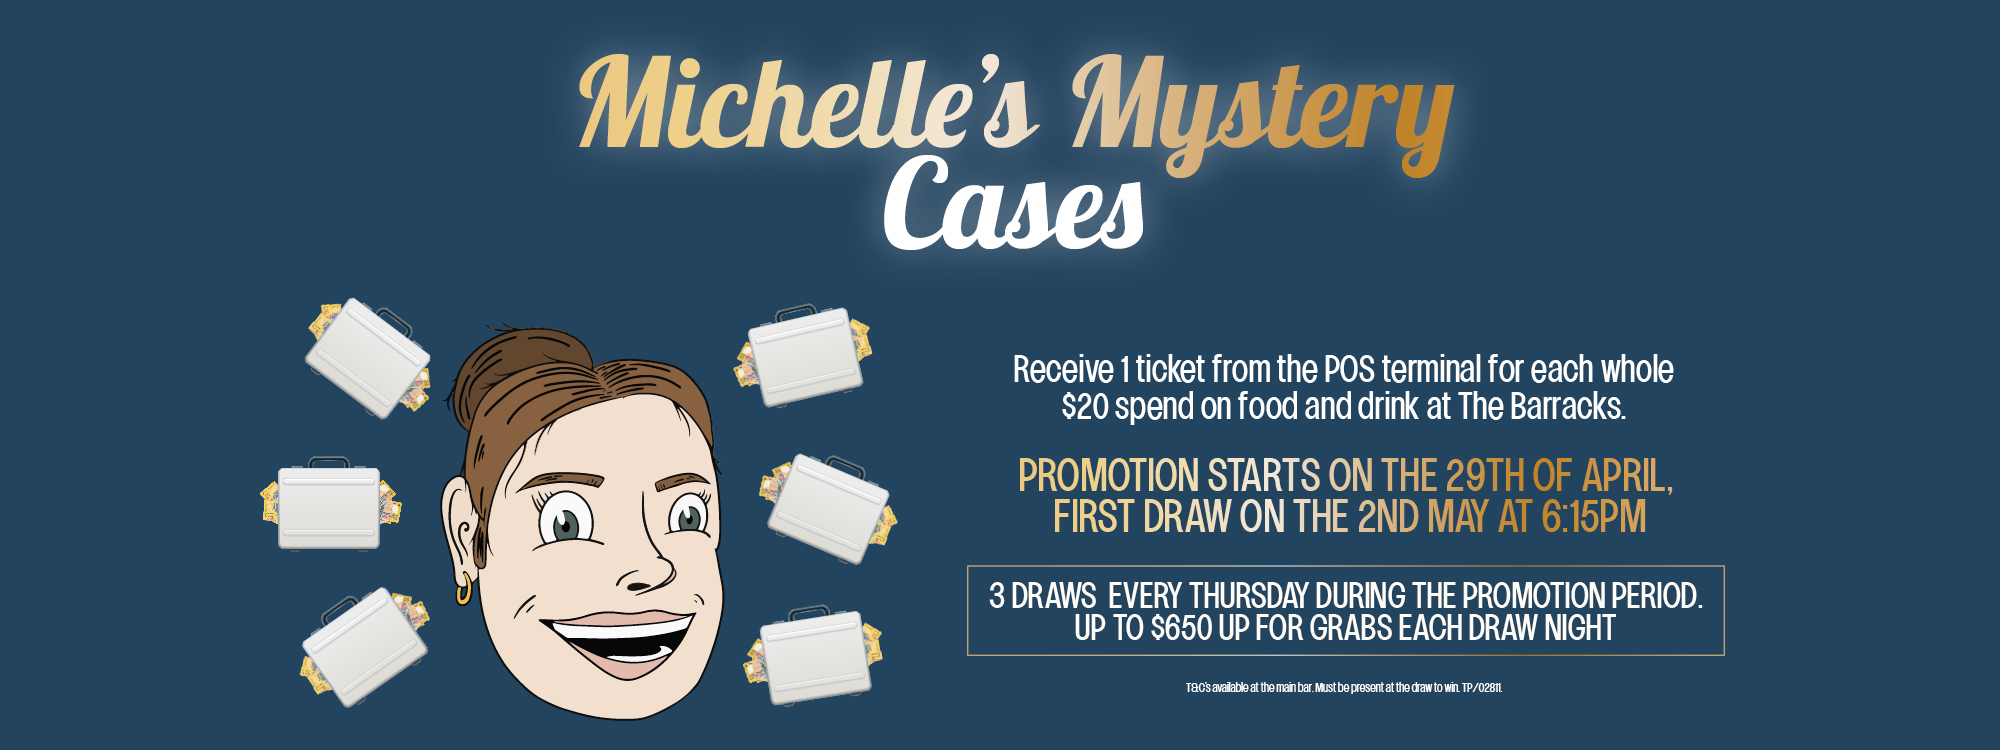 Michelle’s Mystery Cases